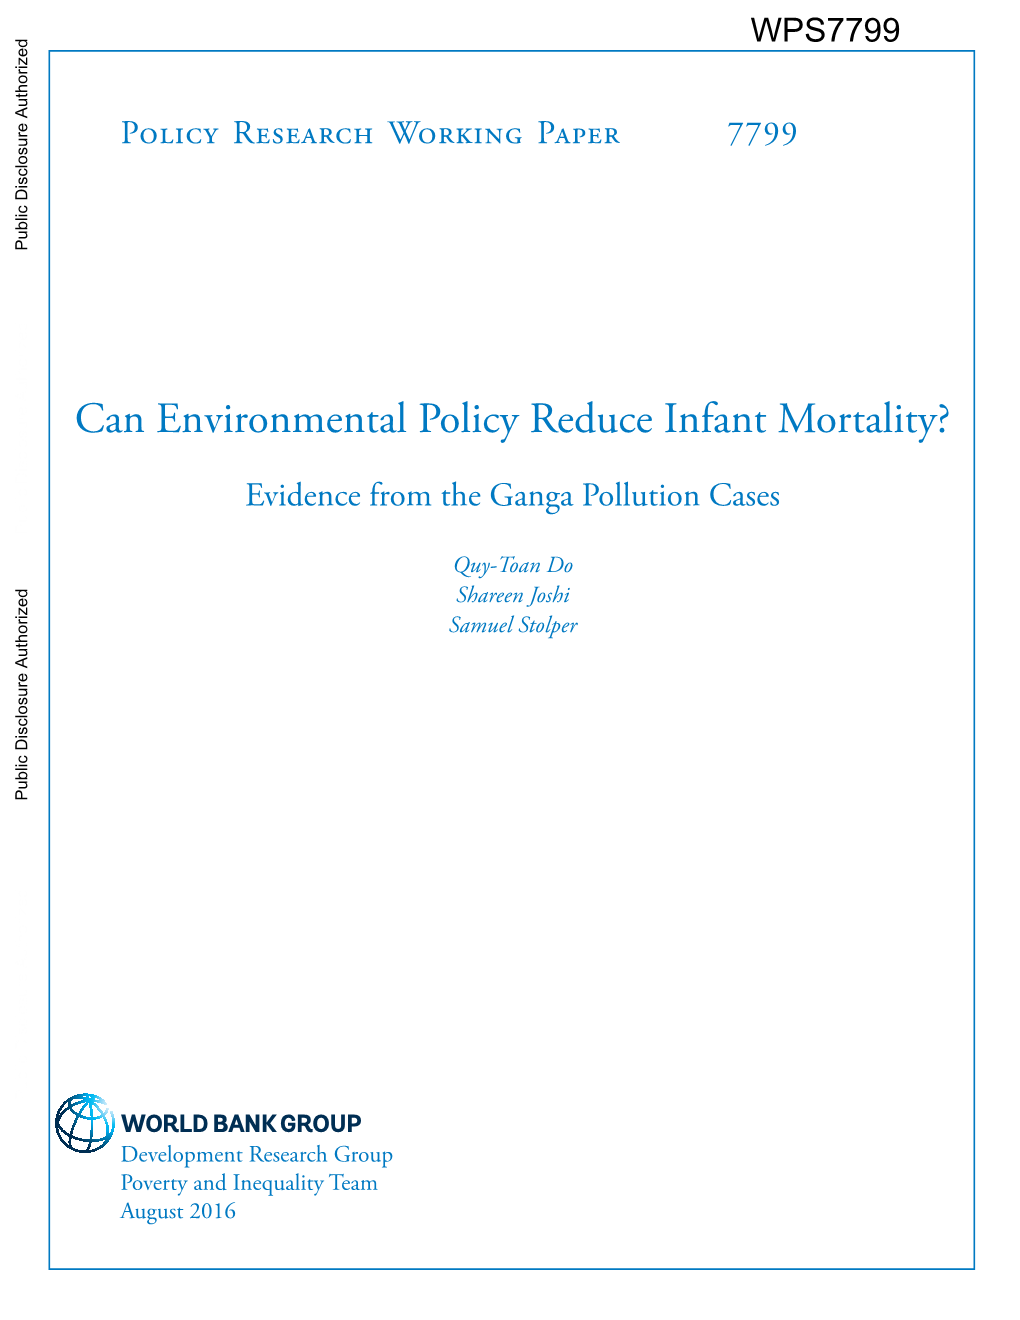 Can Environmental Policy Reduce Infant Mortality?